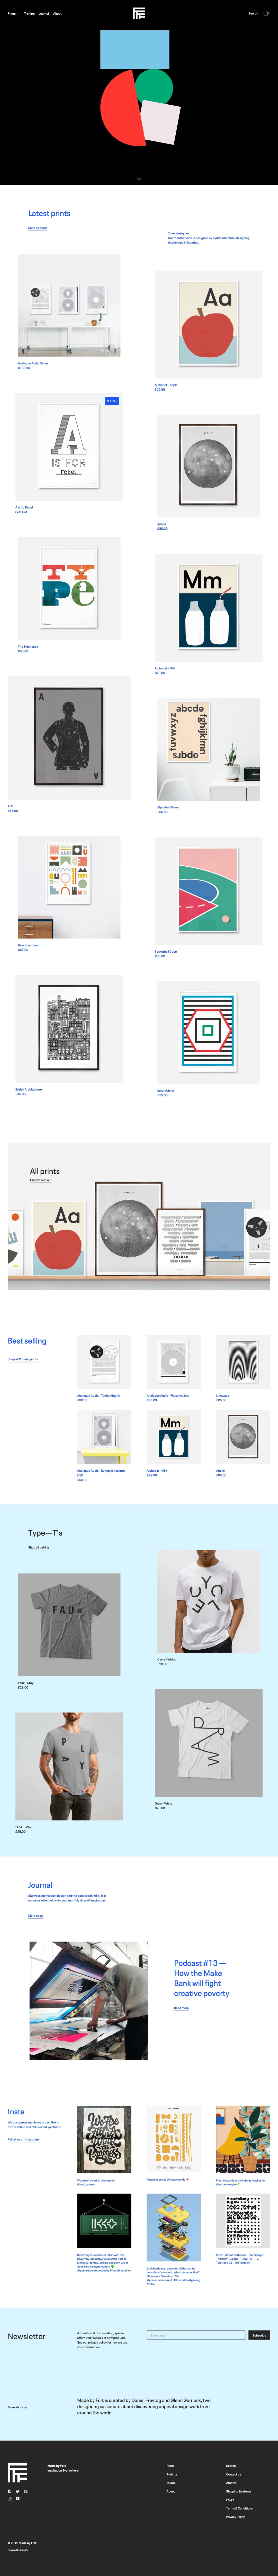 Made by Folk Landing Page Example: Made by Folk is curated by Daniel Freytag and Glenn Garriock, two designers passionate about discovering original design products from around the world and the inspiring stories behind them.